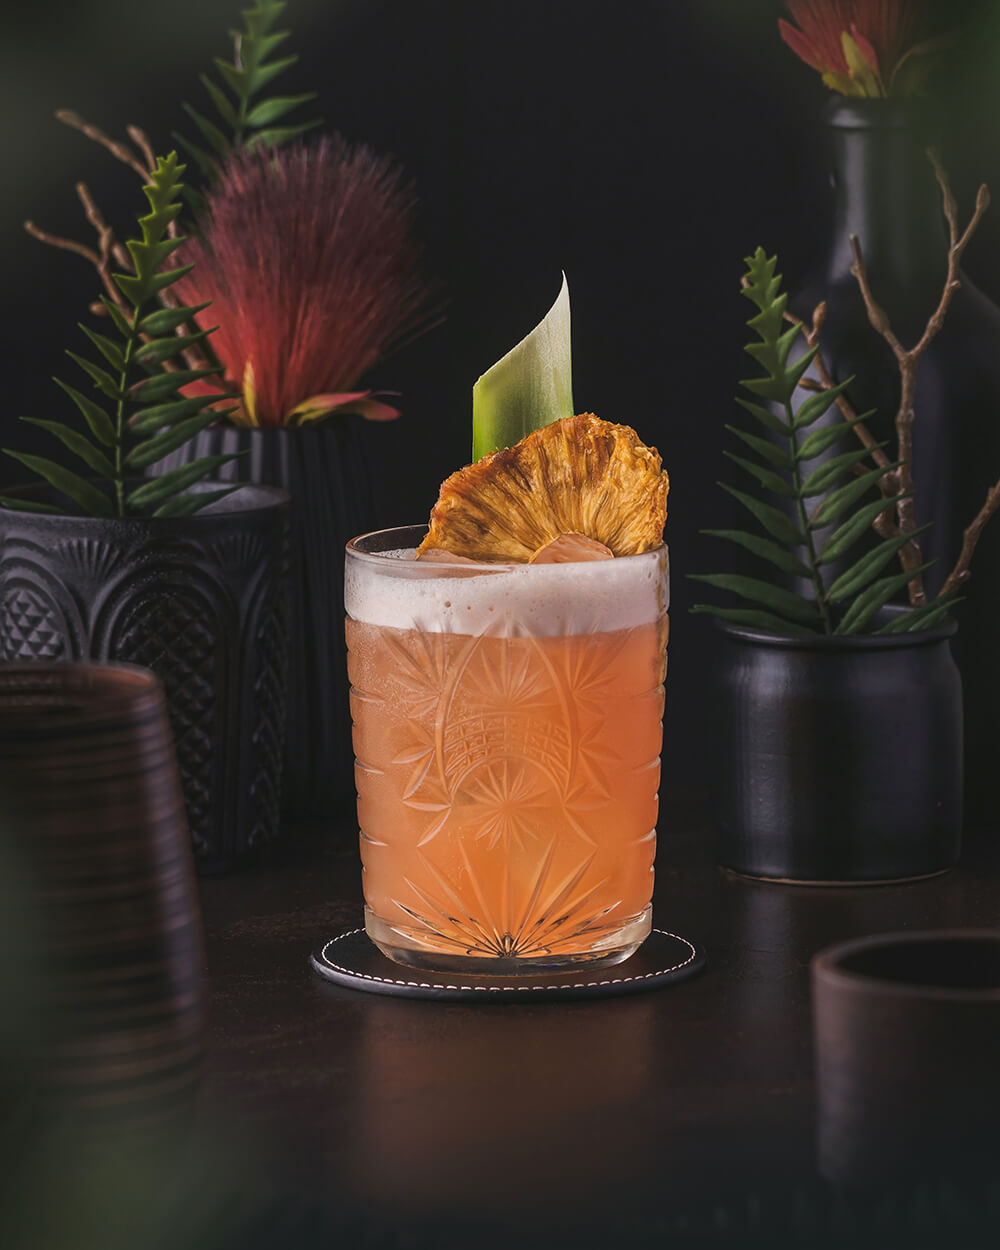 Jungle Bird Cocktail - An interesting orange red colored tiki cocktail that combines Jamaican rum with Campari and pineapple. Garnished with pineapple leaf and pineapple chunks.